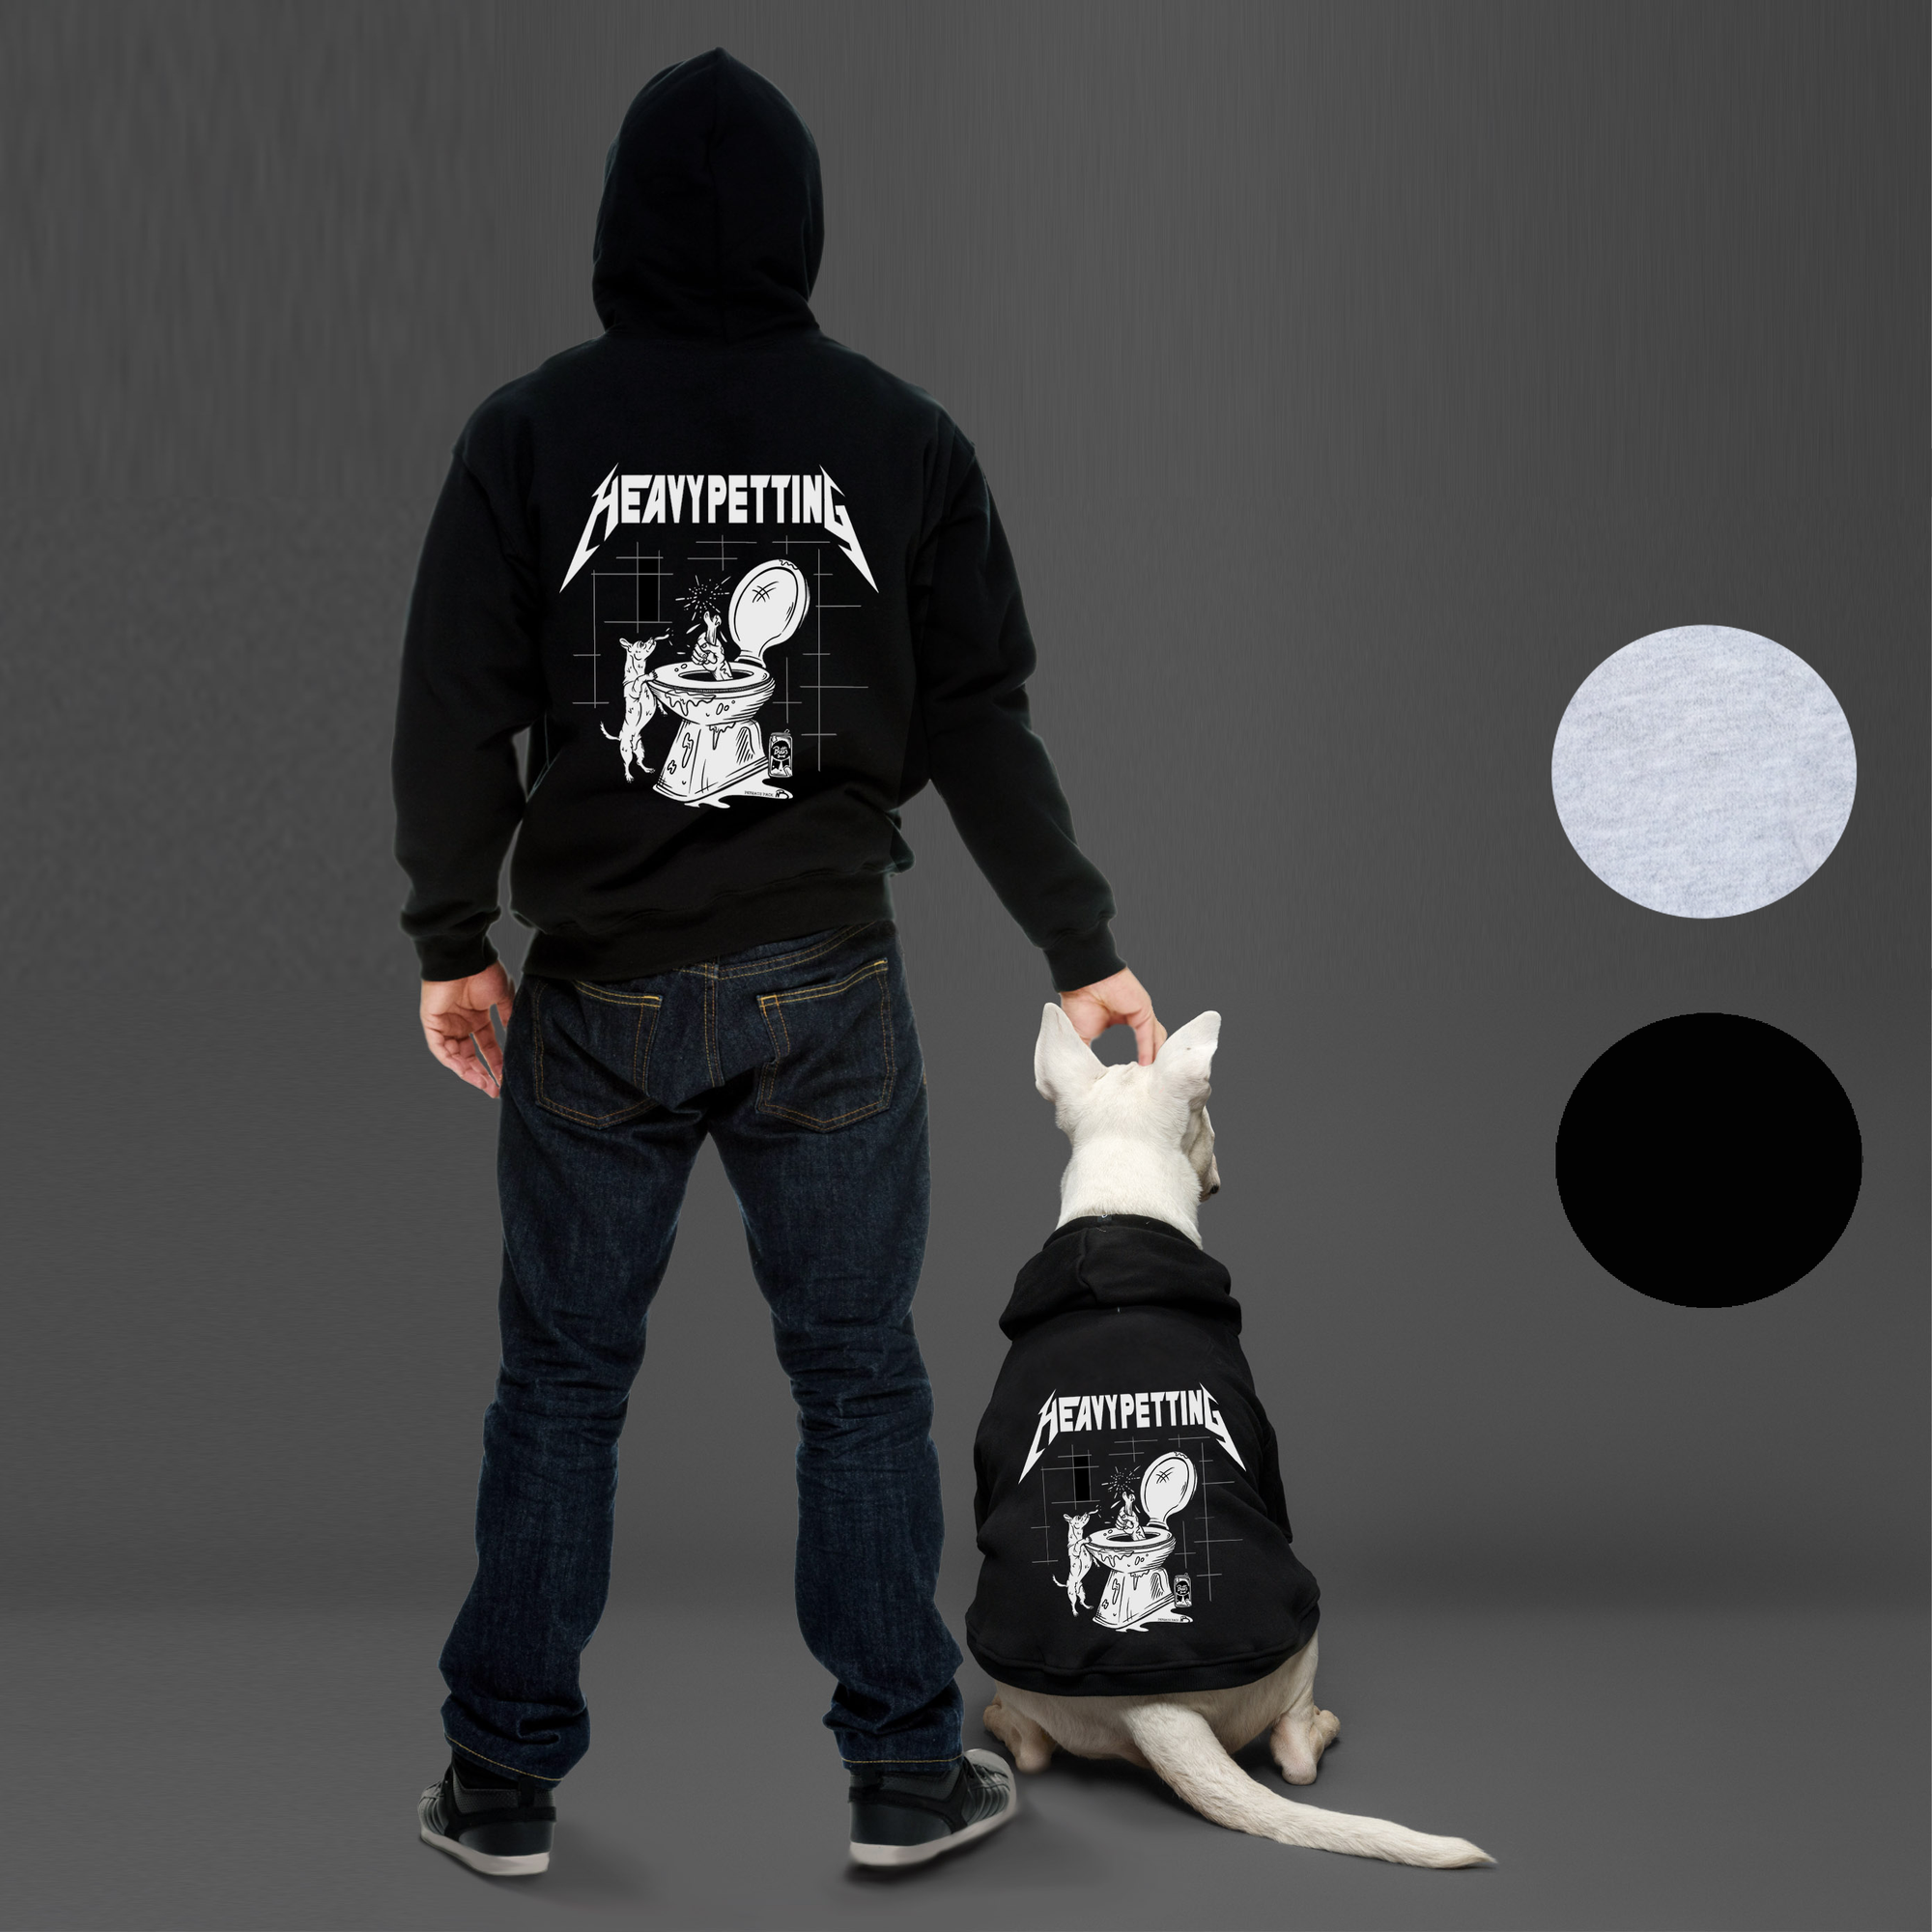 Matching dog and owner outfits, dog and human apparel for dog lover gifts. Dog hoodie with matching human hoodie. Heavy petting print.